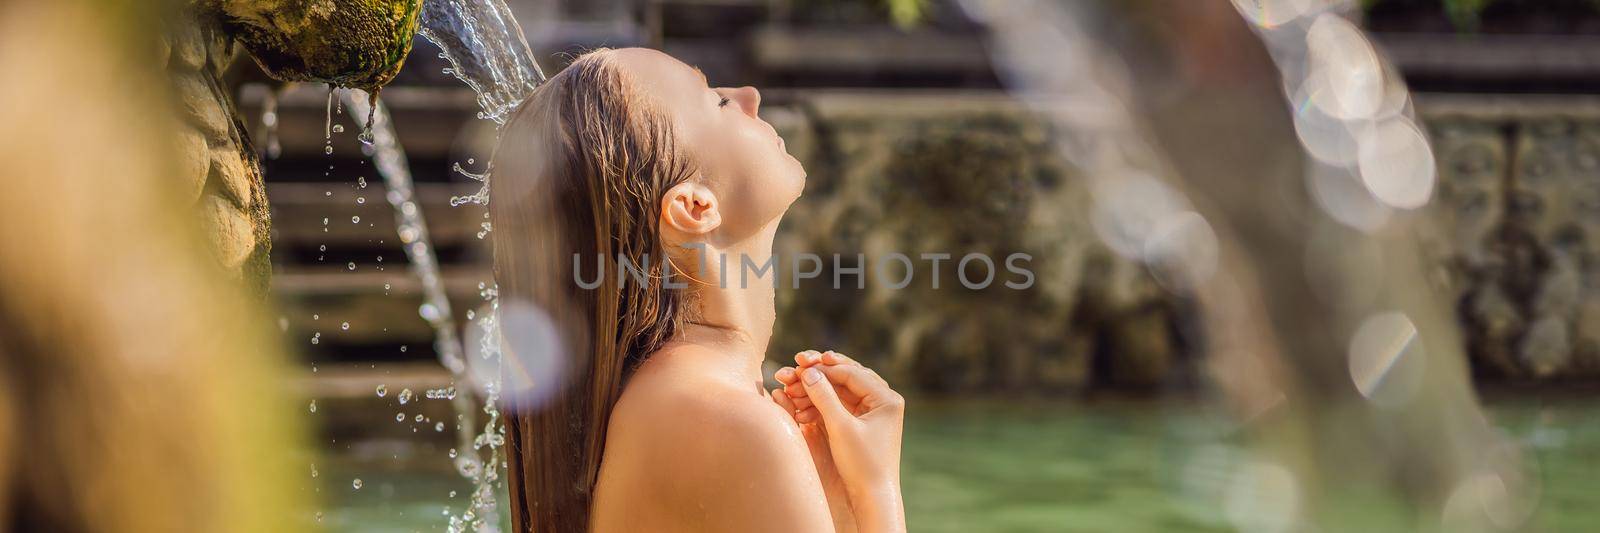 Young woman in hot springs banjar. Thermal water is released from the mouth of statues at a hot springs in Banjar, Bali, Indonesia. BANNER, LONG FORMAT